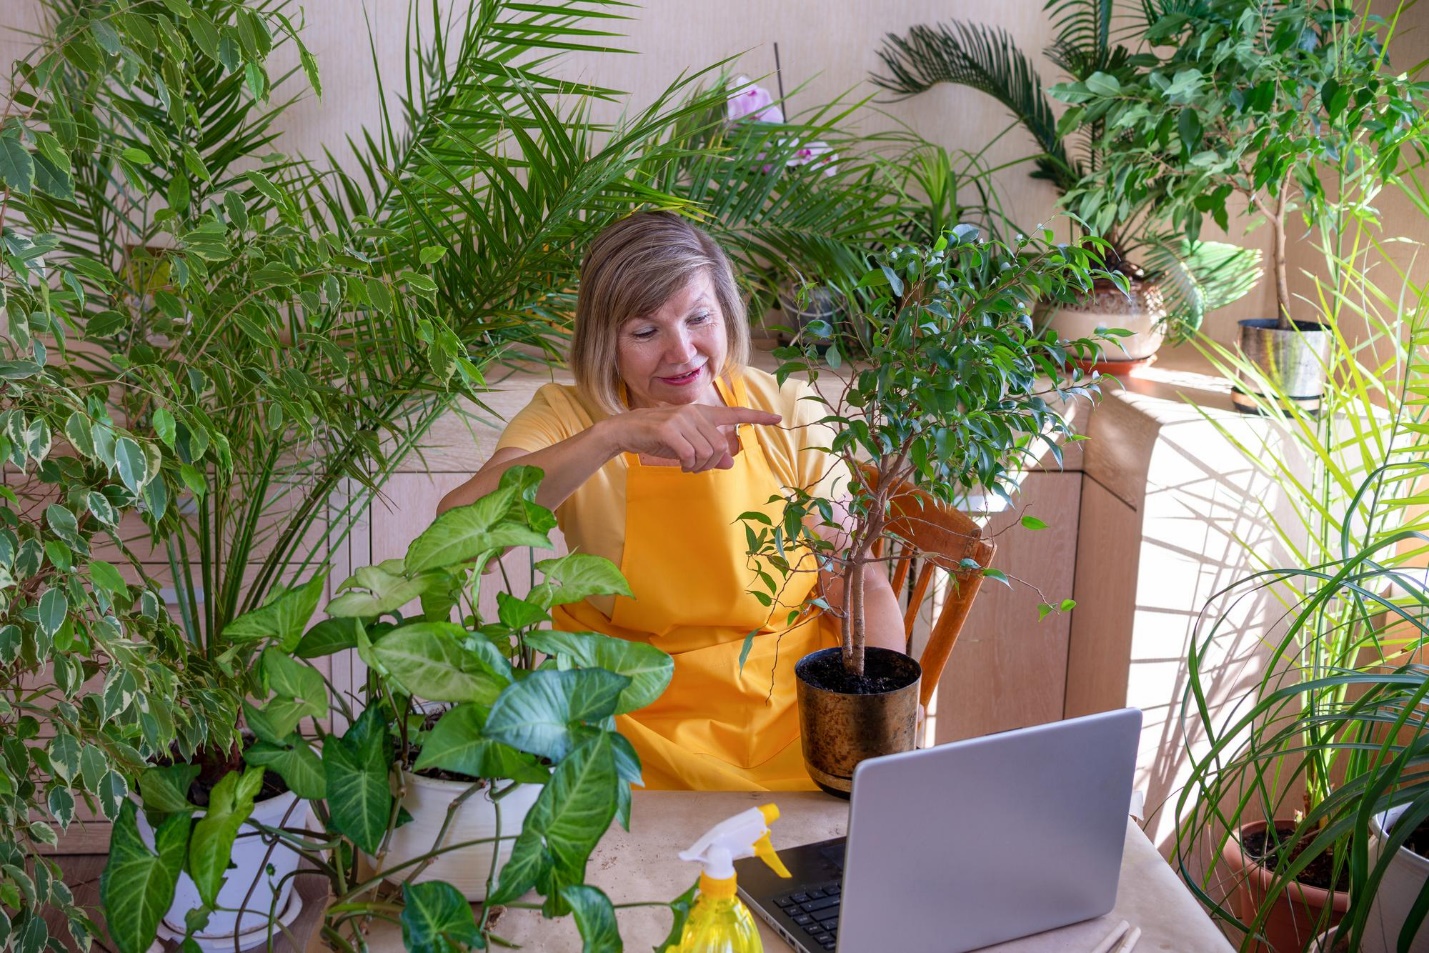 What are examples of successful marketplaces for indoor plants?